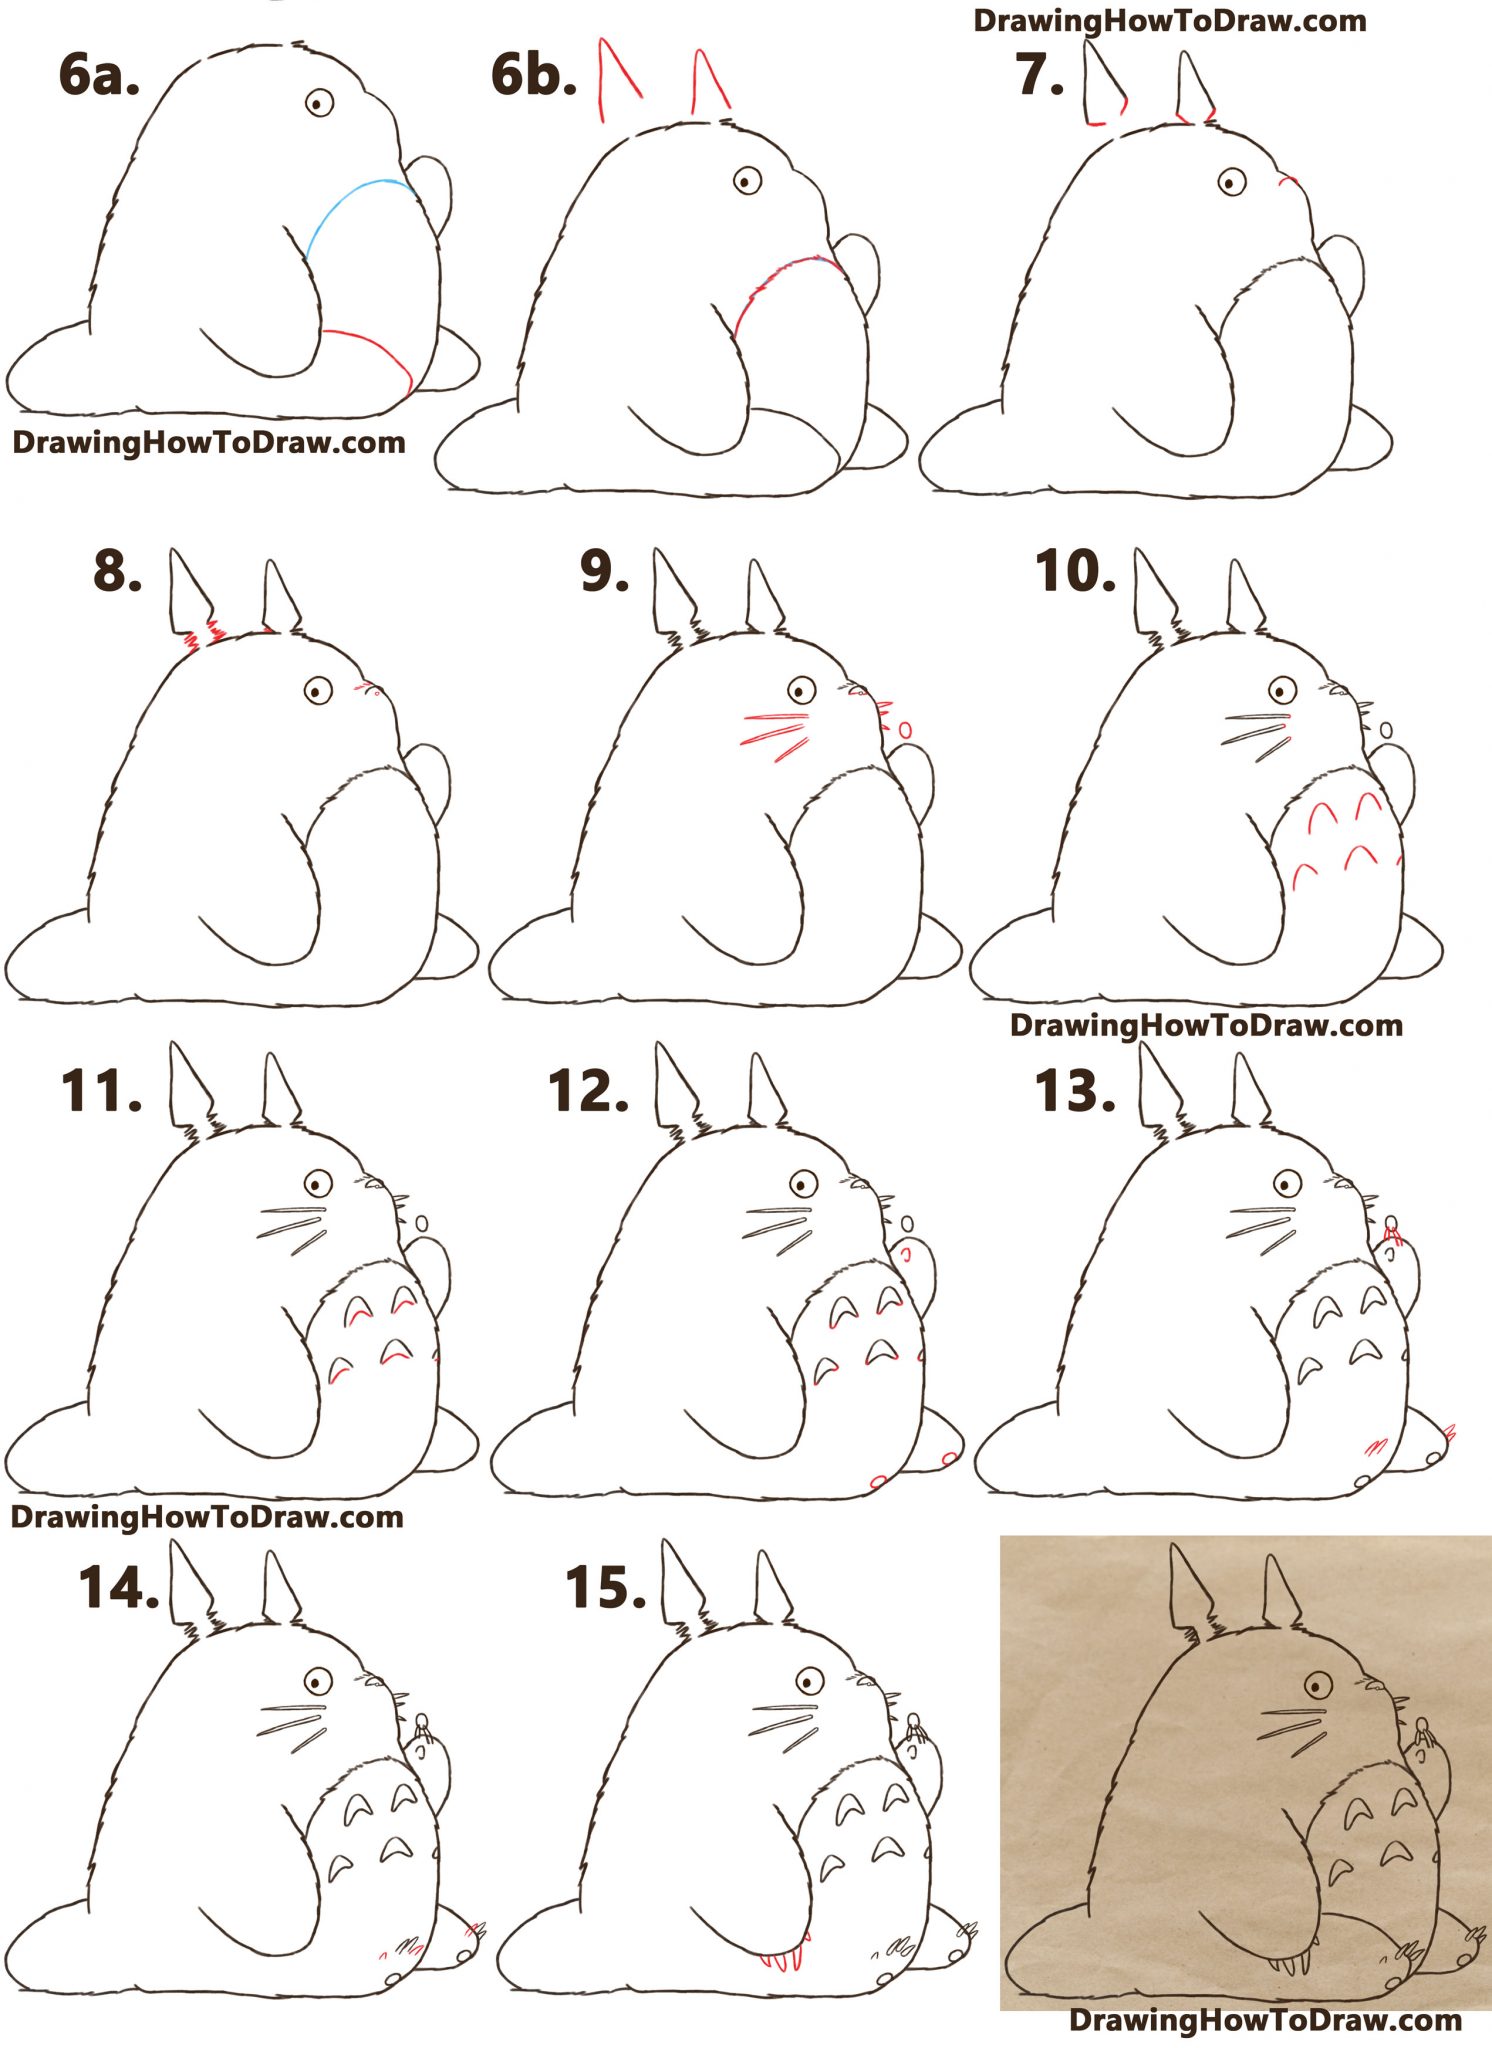 How to Draw Totoro from My Neighbor Totoro Easy Step by Step Drawing